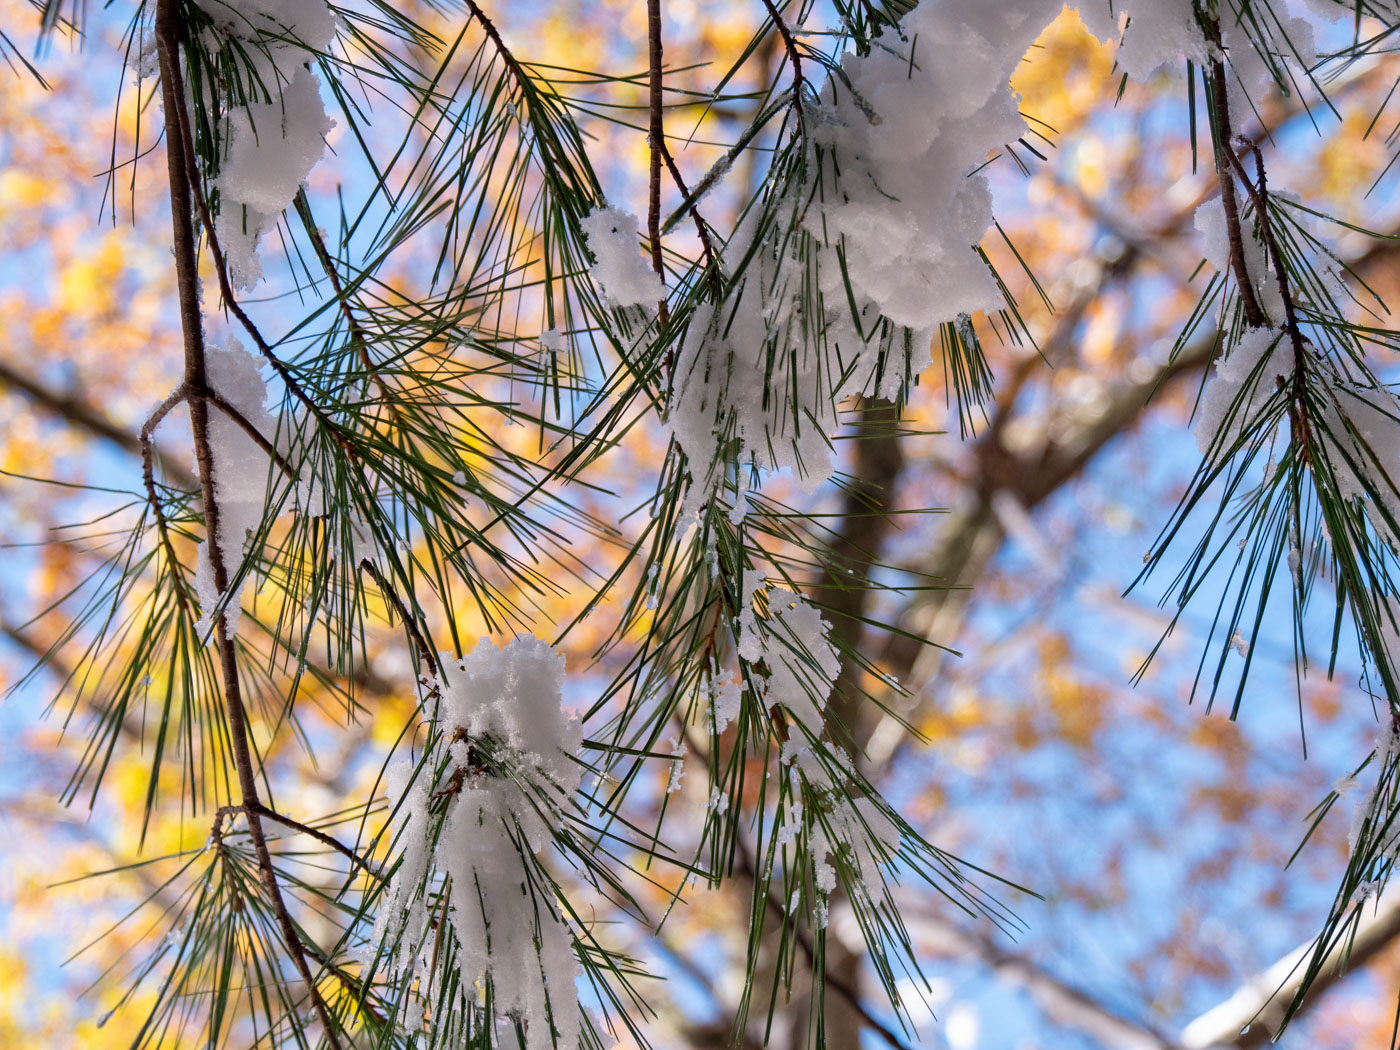 Snow in the pines, with fall going on above.